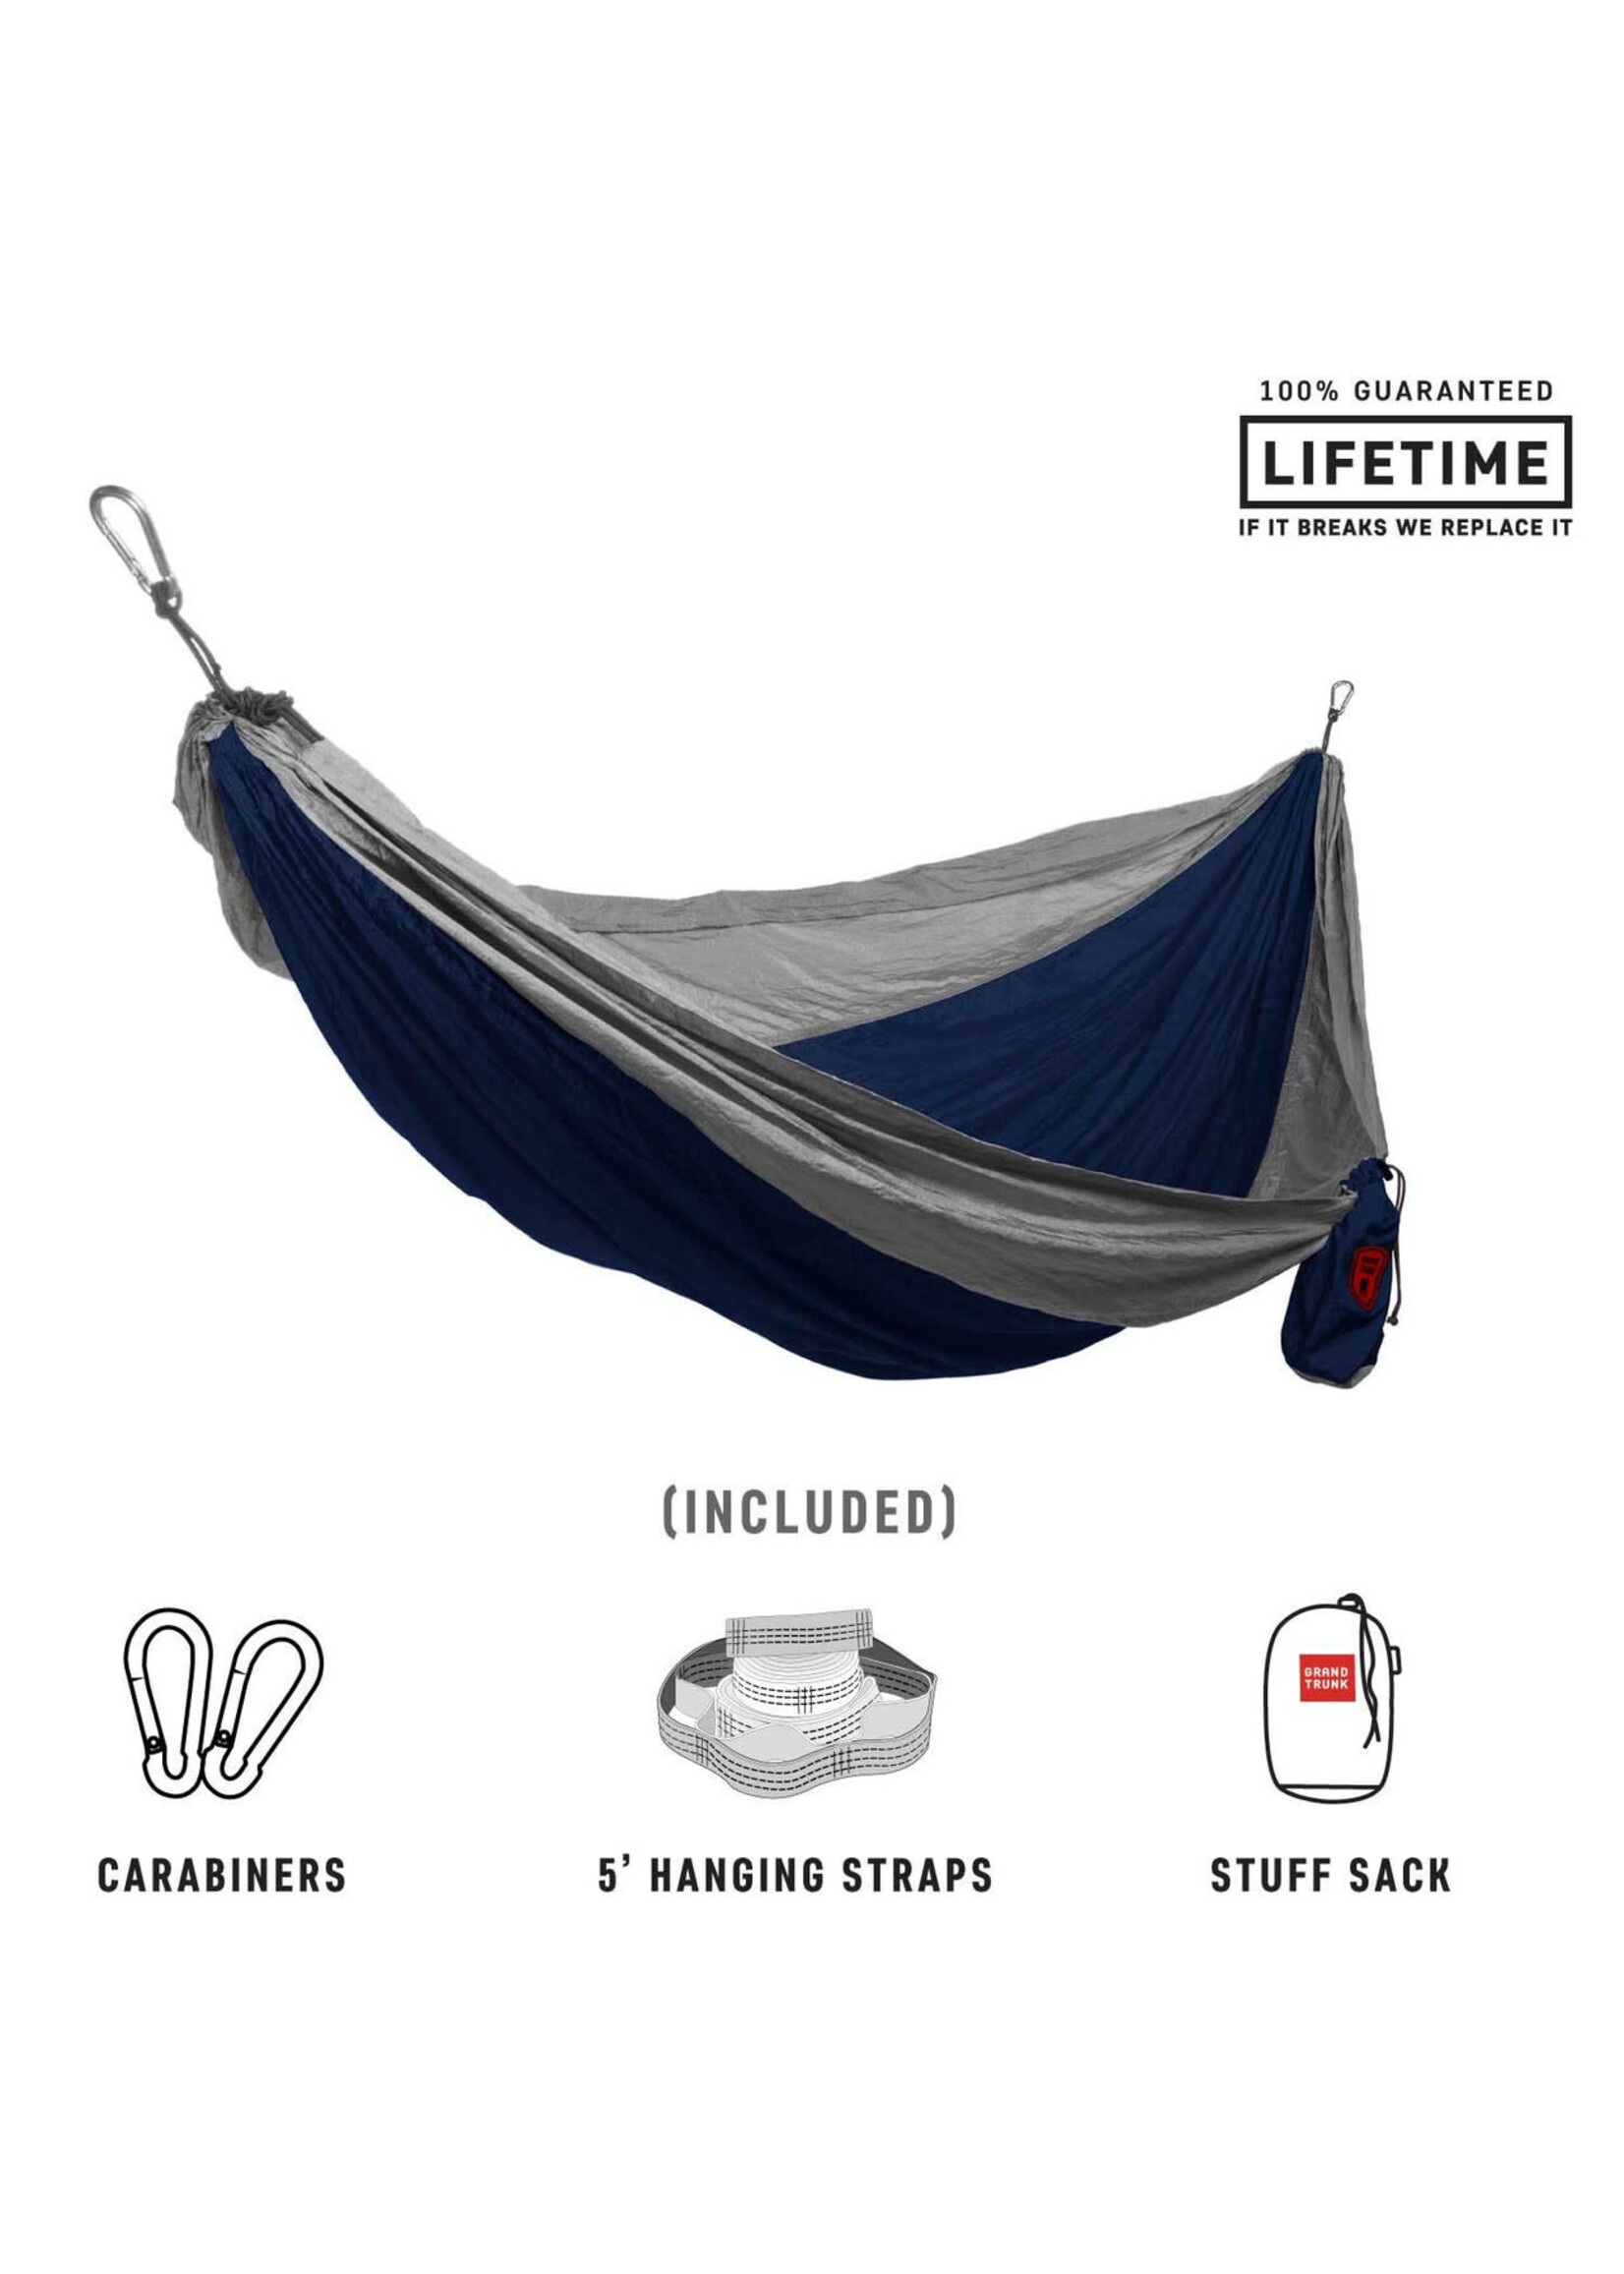 Grand Trunk Grand Trunk Double Deluxe Hammock With Strap